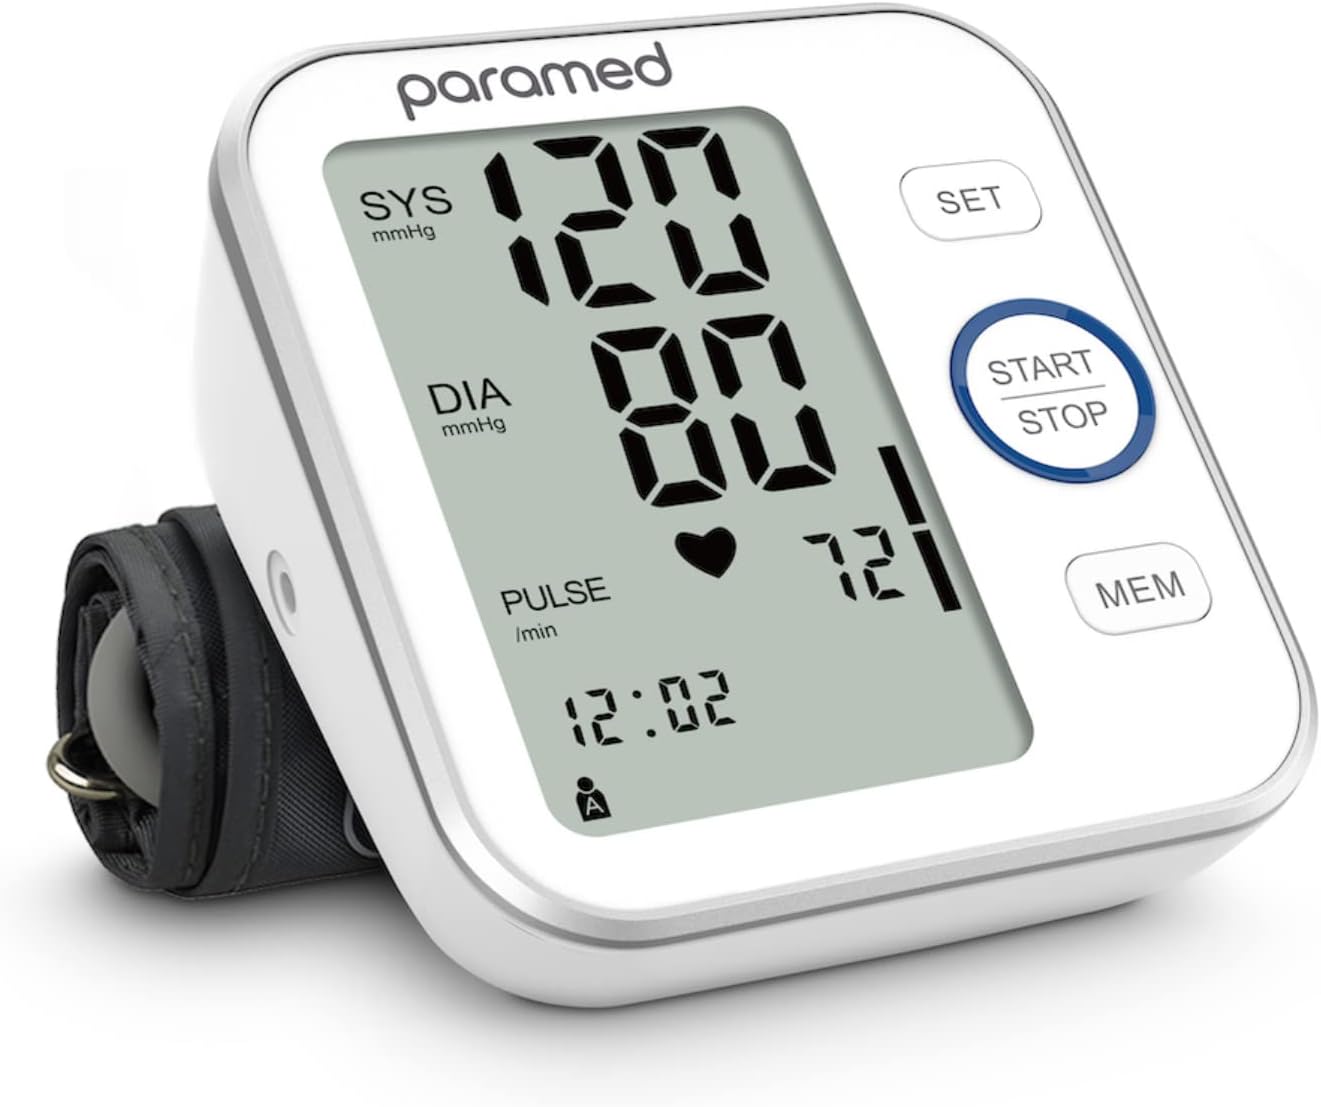 Paramed Blood Pressure Monitor - Bp Machine - Automatic Upper Arm Blood Pressure Cuff 8.7-15.7 inches - Large LCD Display 120 Sets Memory - Device Bag Batteries Included